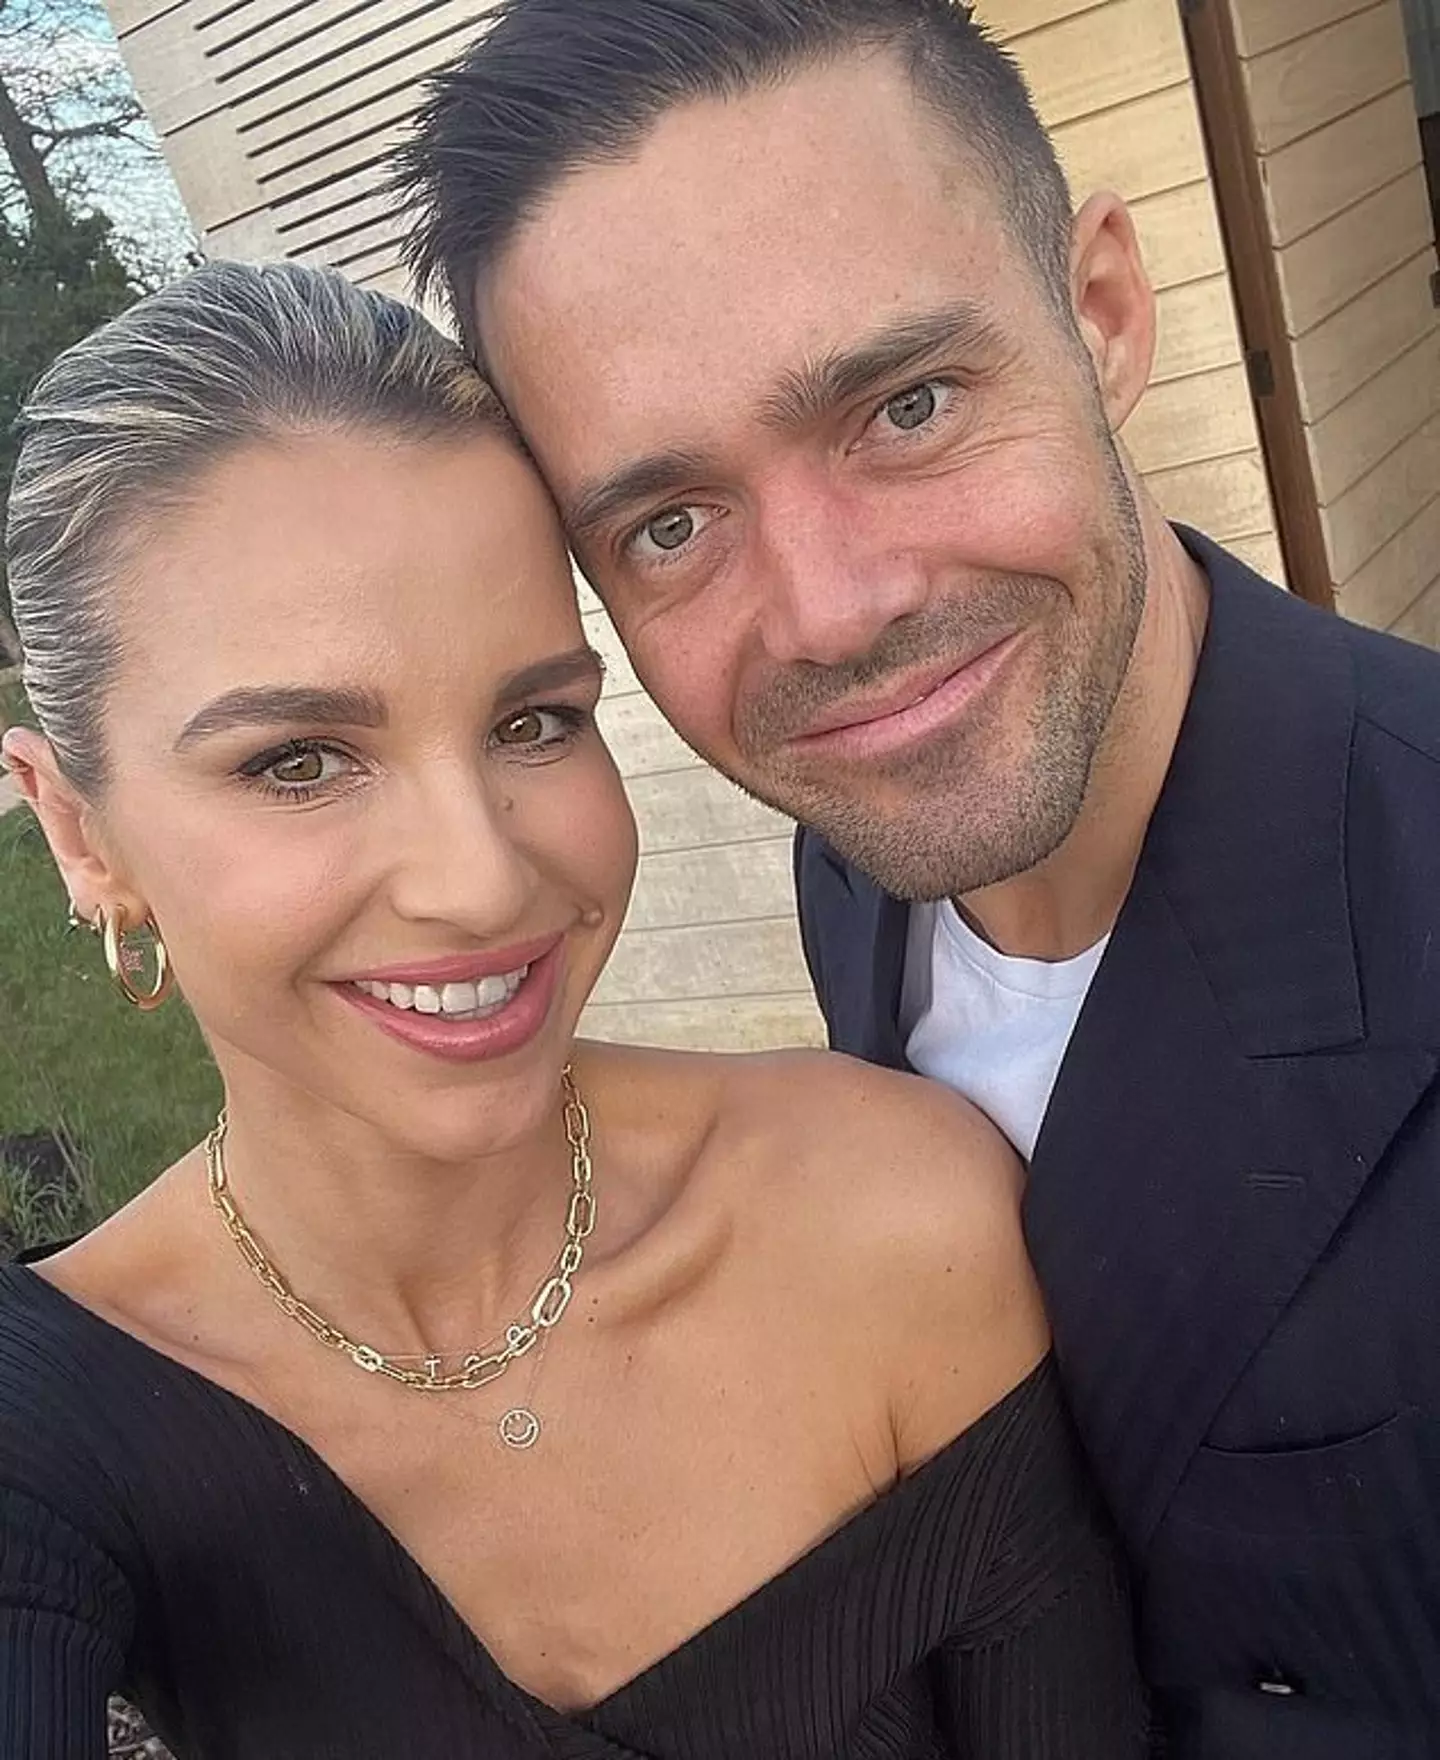 35-year-old Matthews - who married the Irish model, 37, in 2018 - became unwell while on a family holiday in Spain.